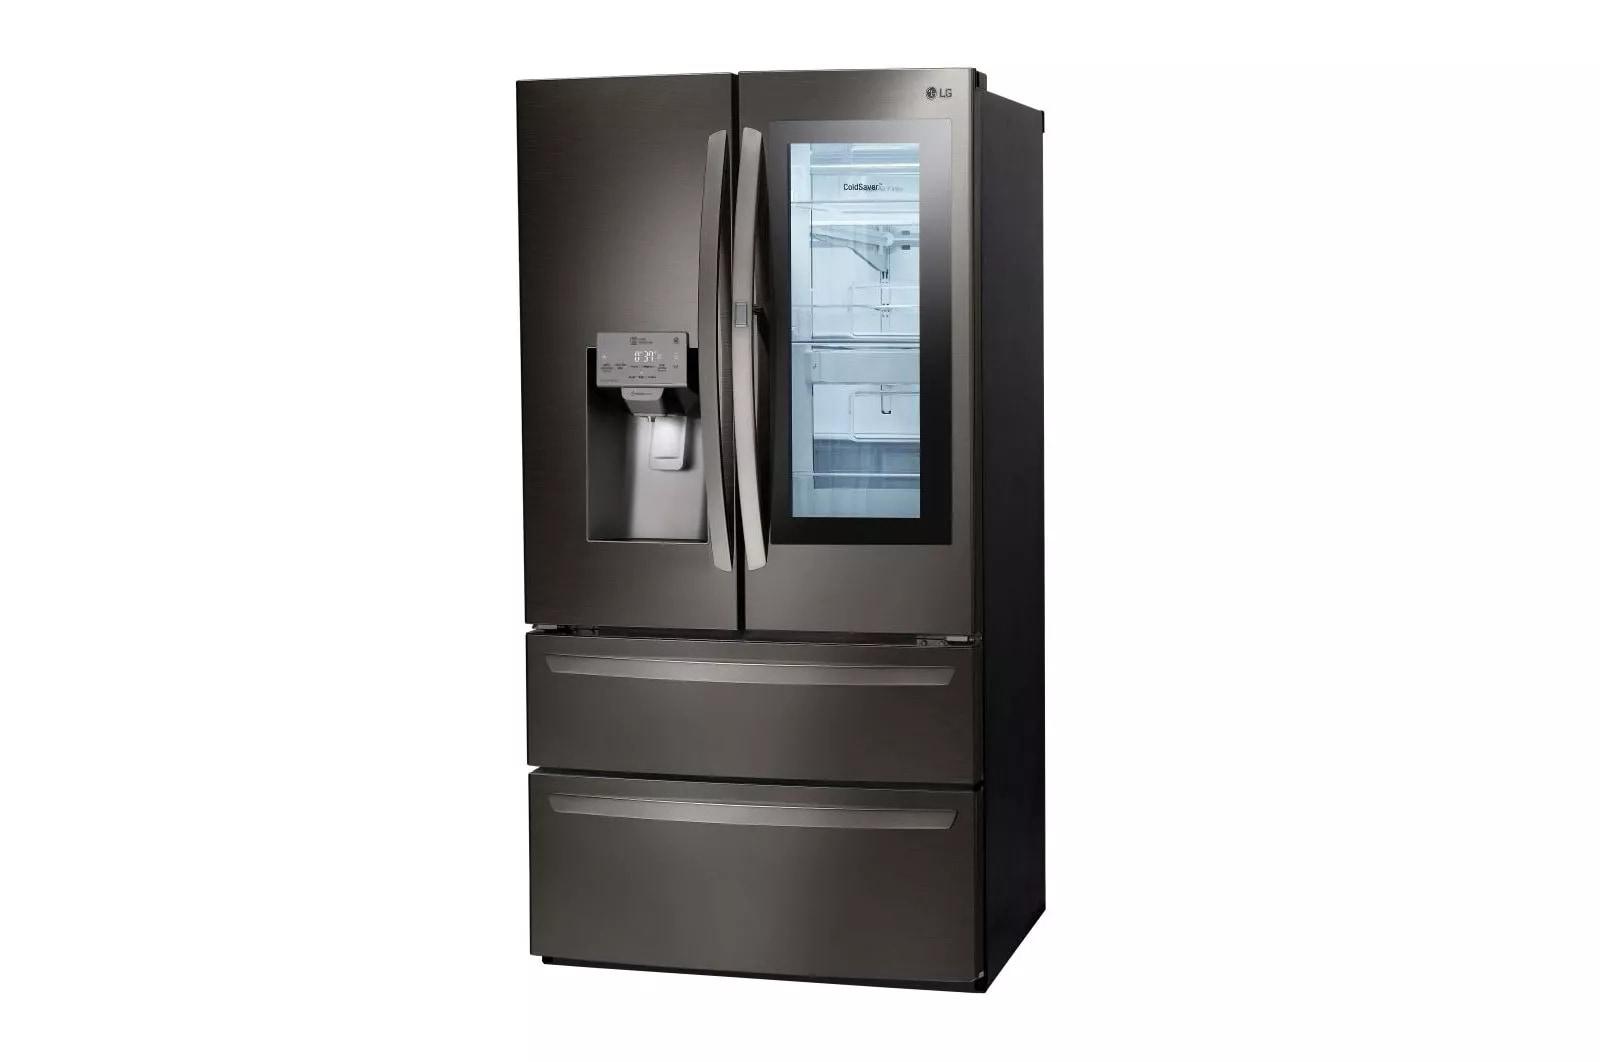 Lg Lmxs28596 36" Wide 27.6 Cu. Ft. Energy Star Rated French Door Refrigerator - Stainless - image 5 of 5